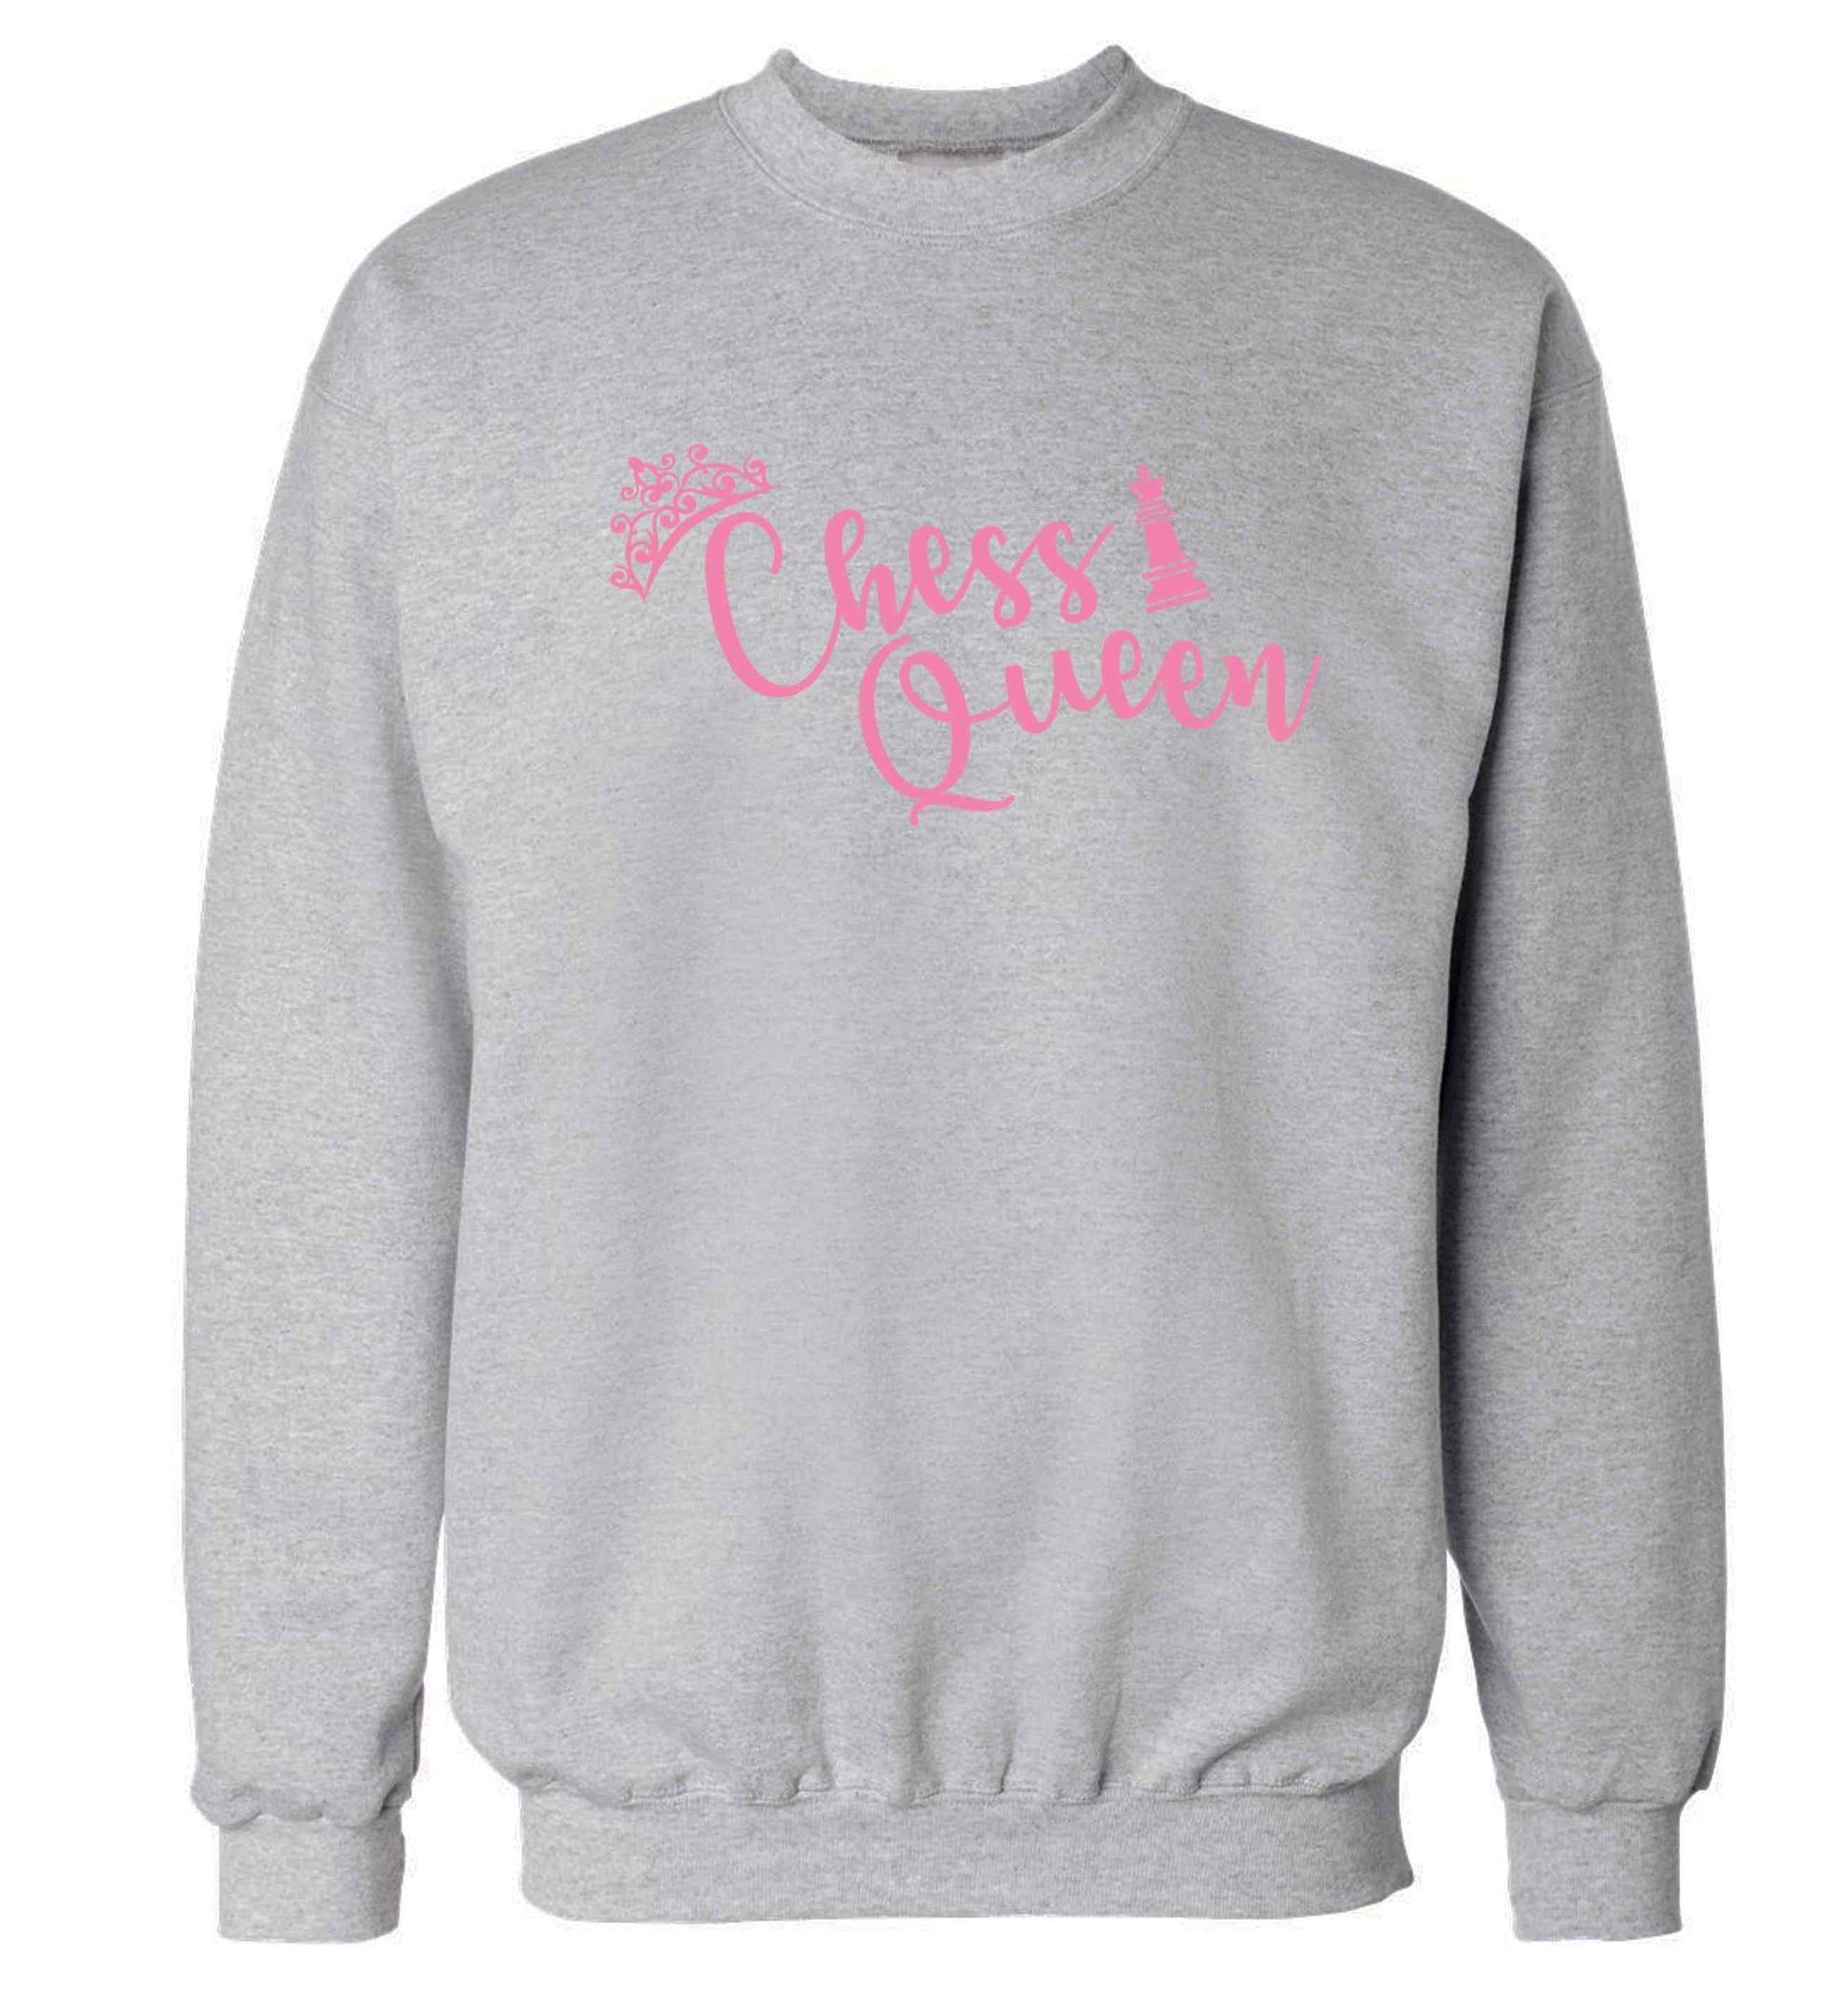 Pink chess queen  Adult's unisex grey Sweater 2XL